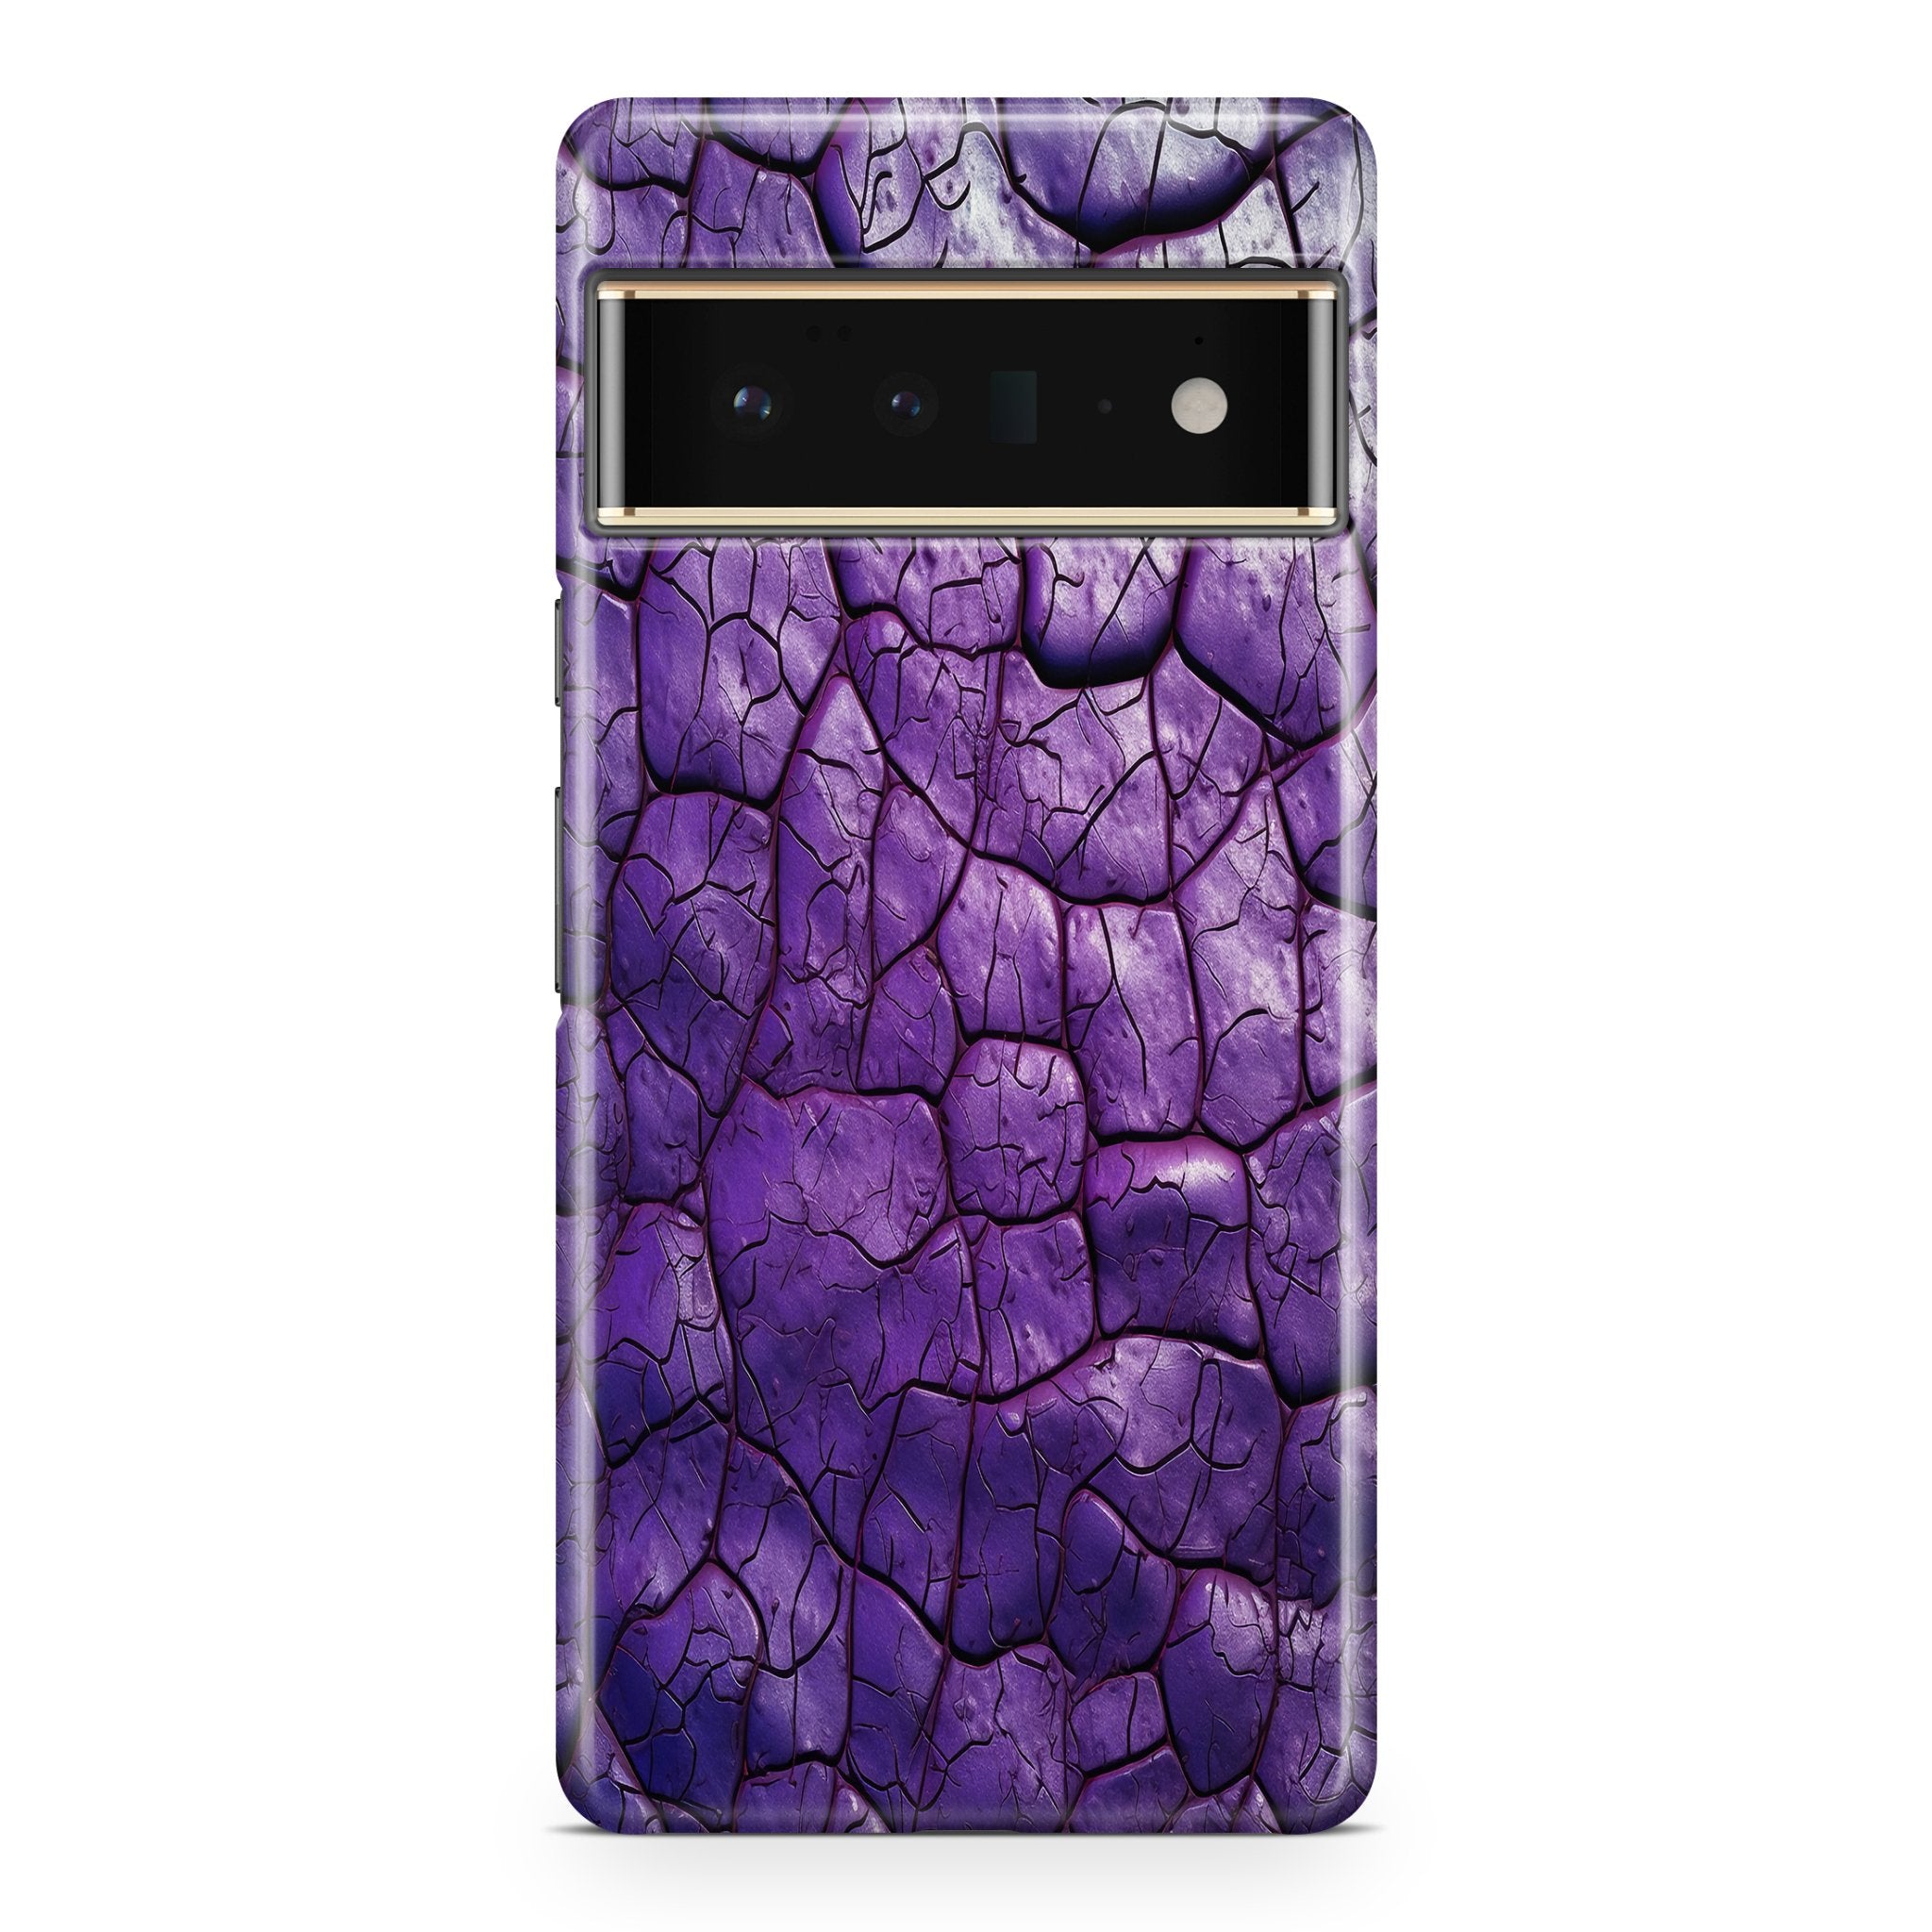 Purple Reptile Skin - Google phone case designs by CaseSwagger